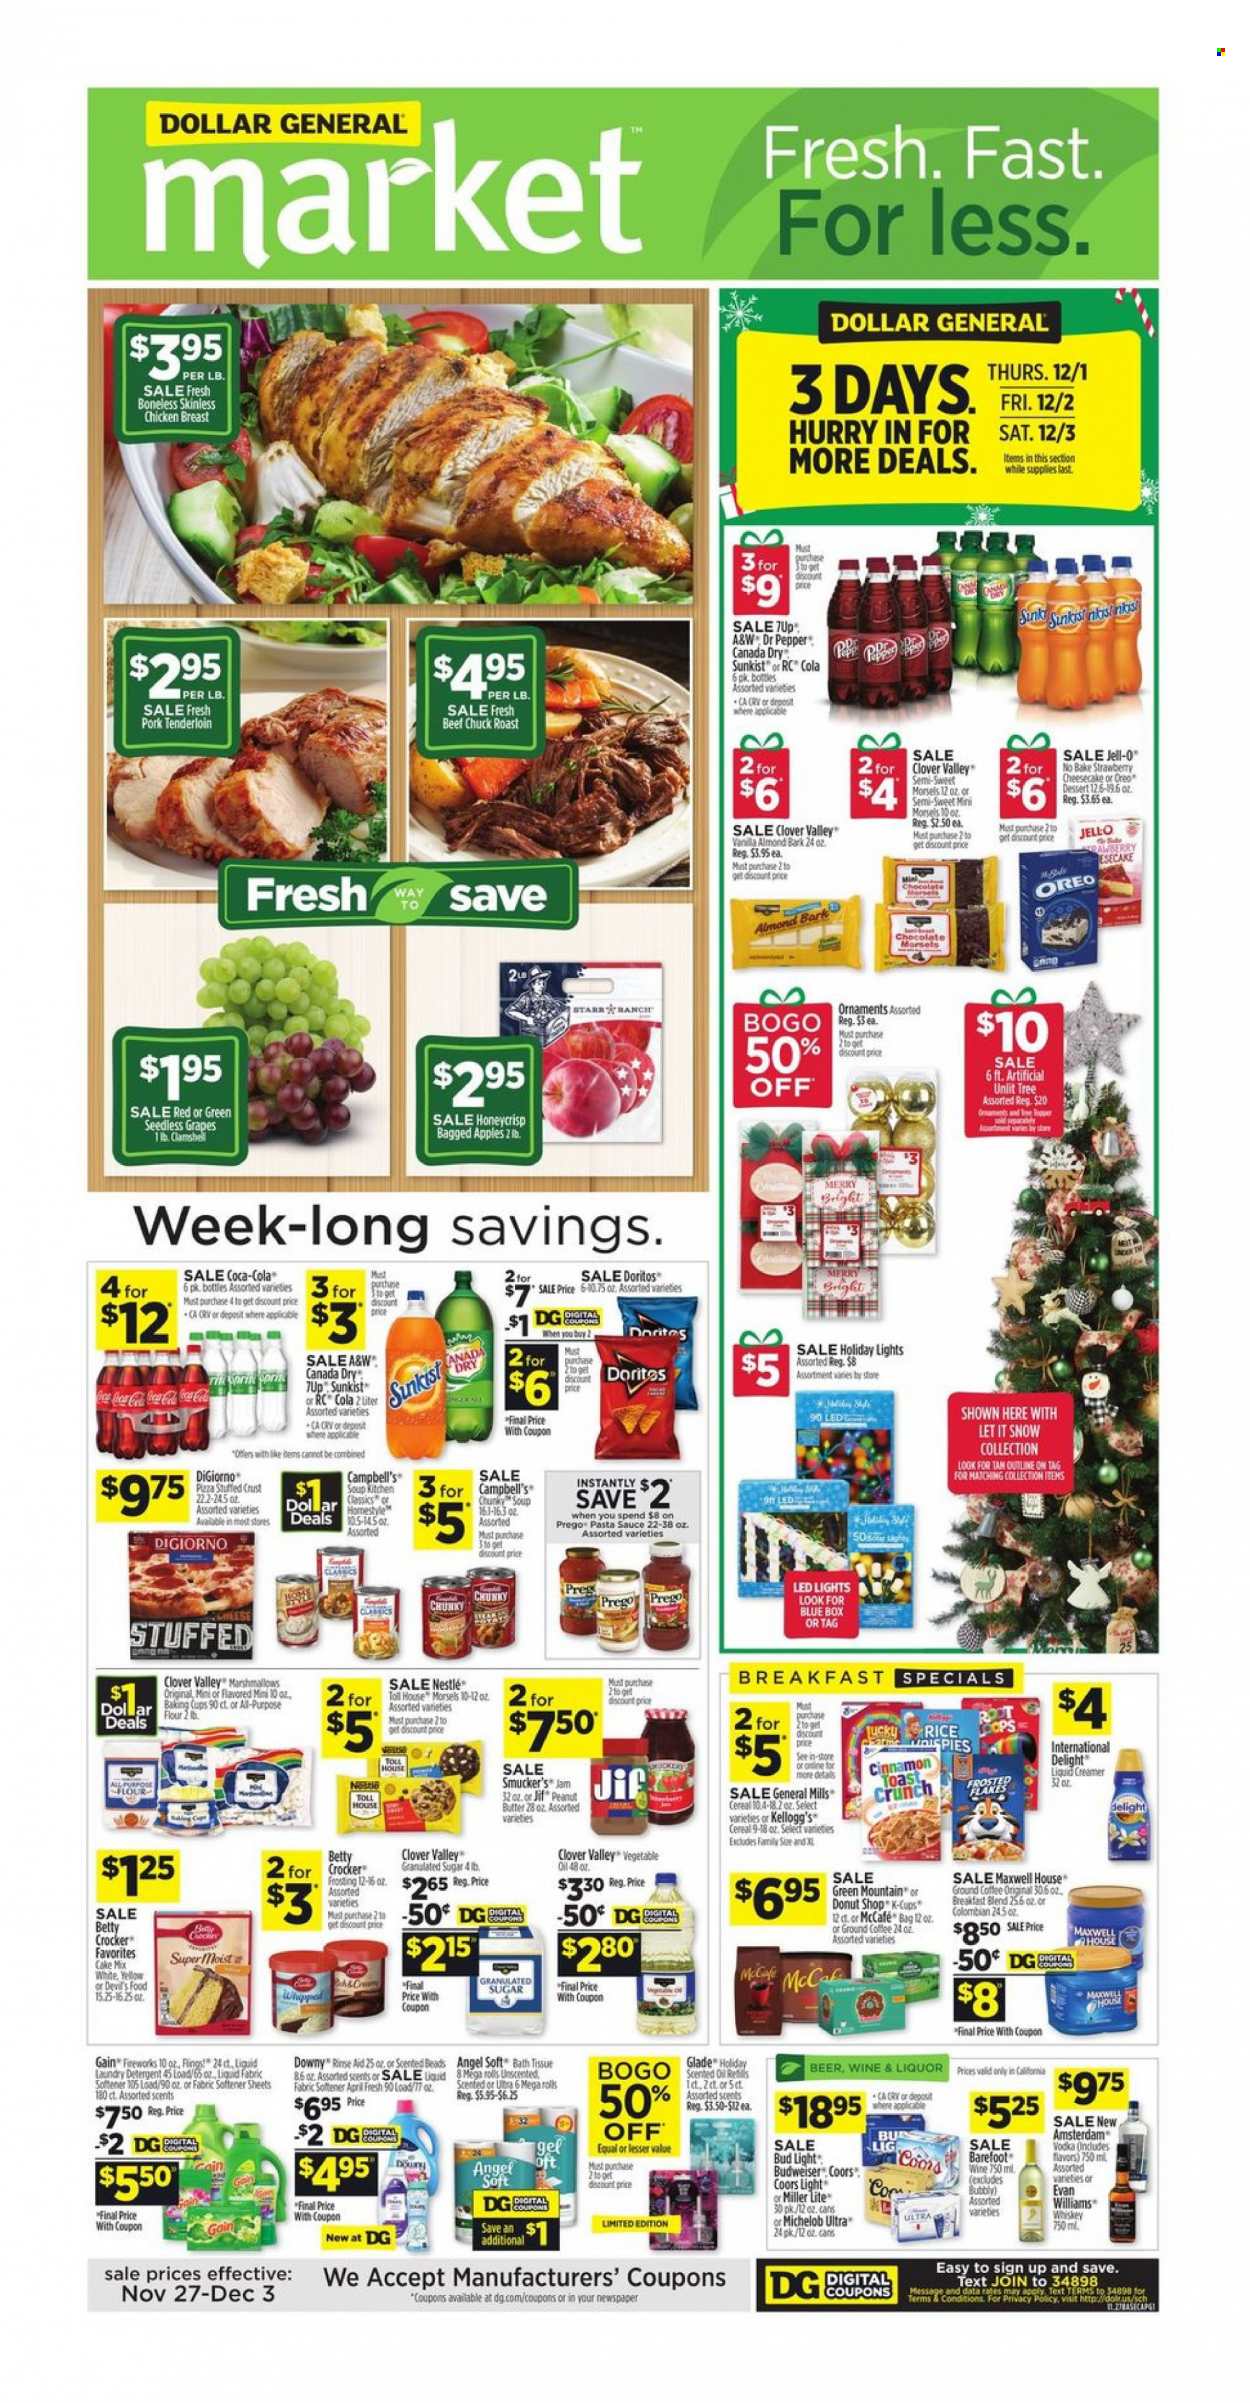 thumbnail - Dollar General Flyer - 11/27/2022 - 12/03/2022 - Sales products - cheesecake, cake mix, apples, grapes, seedless grapes, Campbell's, pizza, pasta sauce, soup, sauce, Oreo, Clover, creamer, marshmallows, Nestlé, chocolate, Kellogg's, Doritos, flour, frosting, granulated sugar, sugar, Jell-O, cereals, rice, cinnamon, vegetable oil, oil, fruit jam, peanut butter, Jif, Canada Dry, Coca-Cola, Dr. Pepper, 7UP, A&W, Maxwell House, coffee, ground coffee, coffee capsules, McCafe, K-Cups, breakfast blend, Green Mountain, vodka, whiskey, liquor, Grant's, whisky, beer, Bud Light, chicken breasts, beef meat, chuck roast, pork meat, pork tenderloin, bath tissue, detergent, Gain, fabric softener, laundry detergent, Gain Fireworks, Glade, scented oil, LED light, Budweiser, Miller Lite, Coors, Michelob. Page 1.